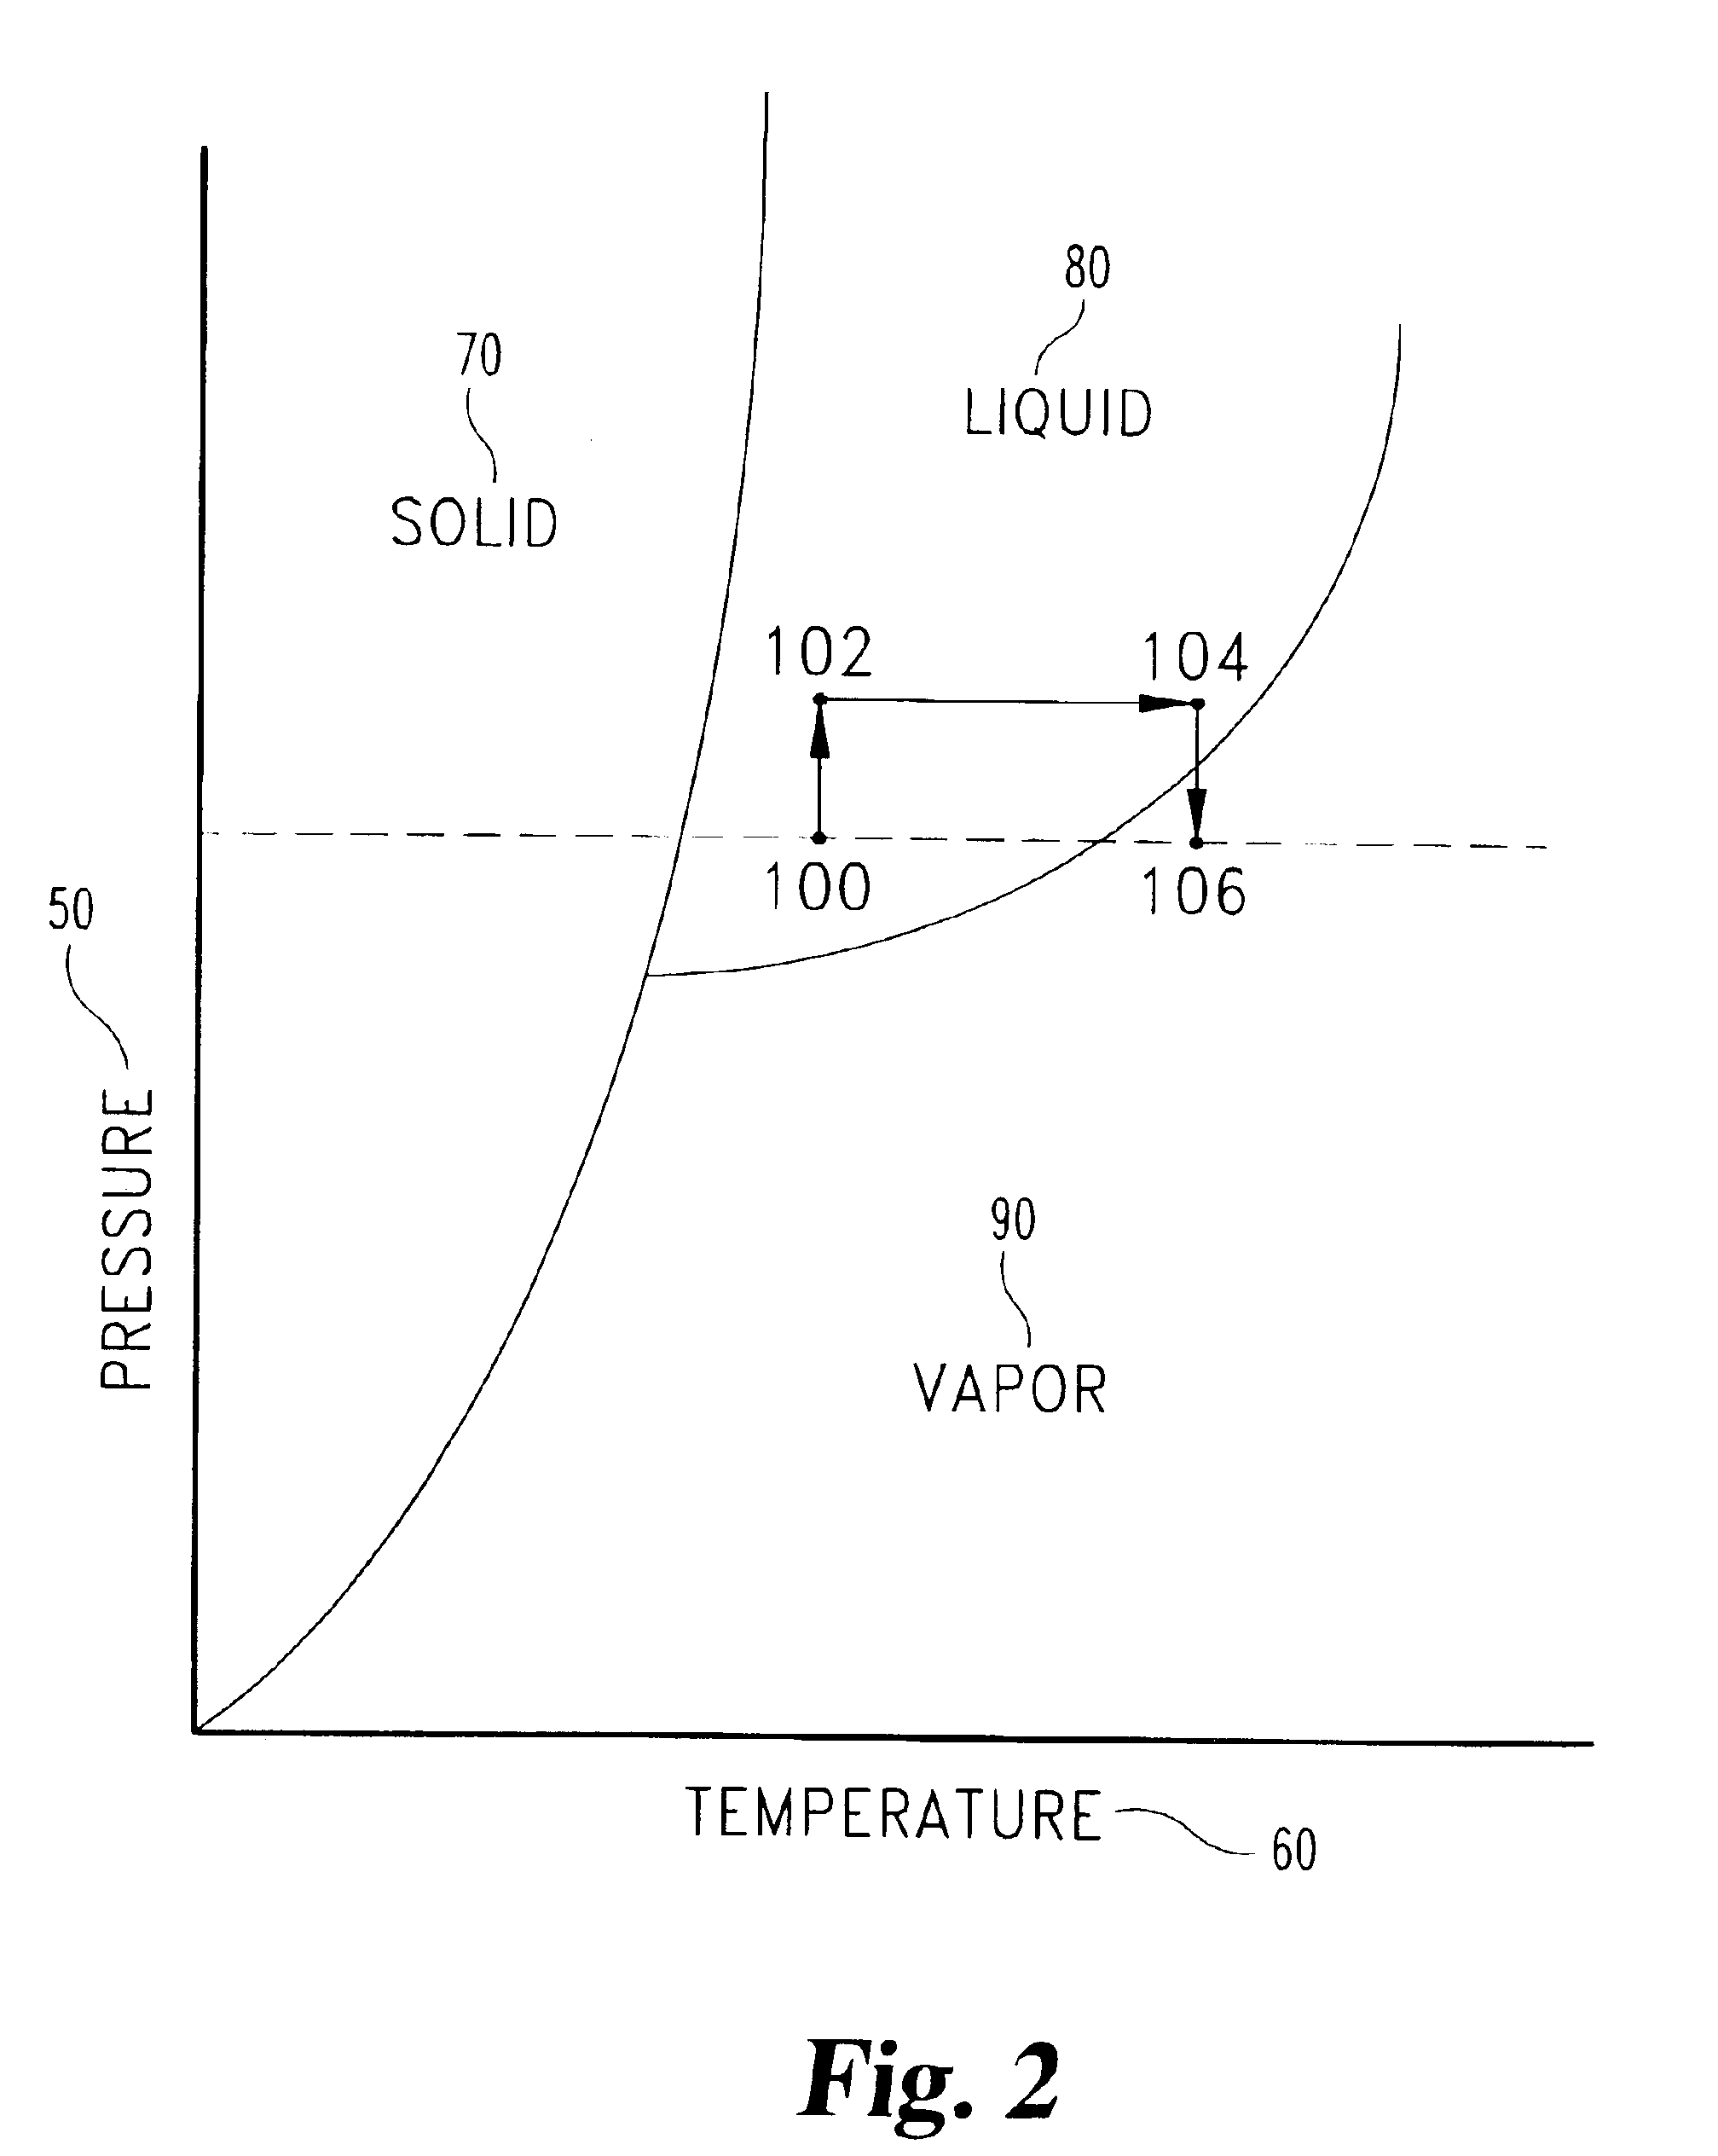 System and method for enhancing internal combustion engine aftertreatment applications by superheated fuel injection